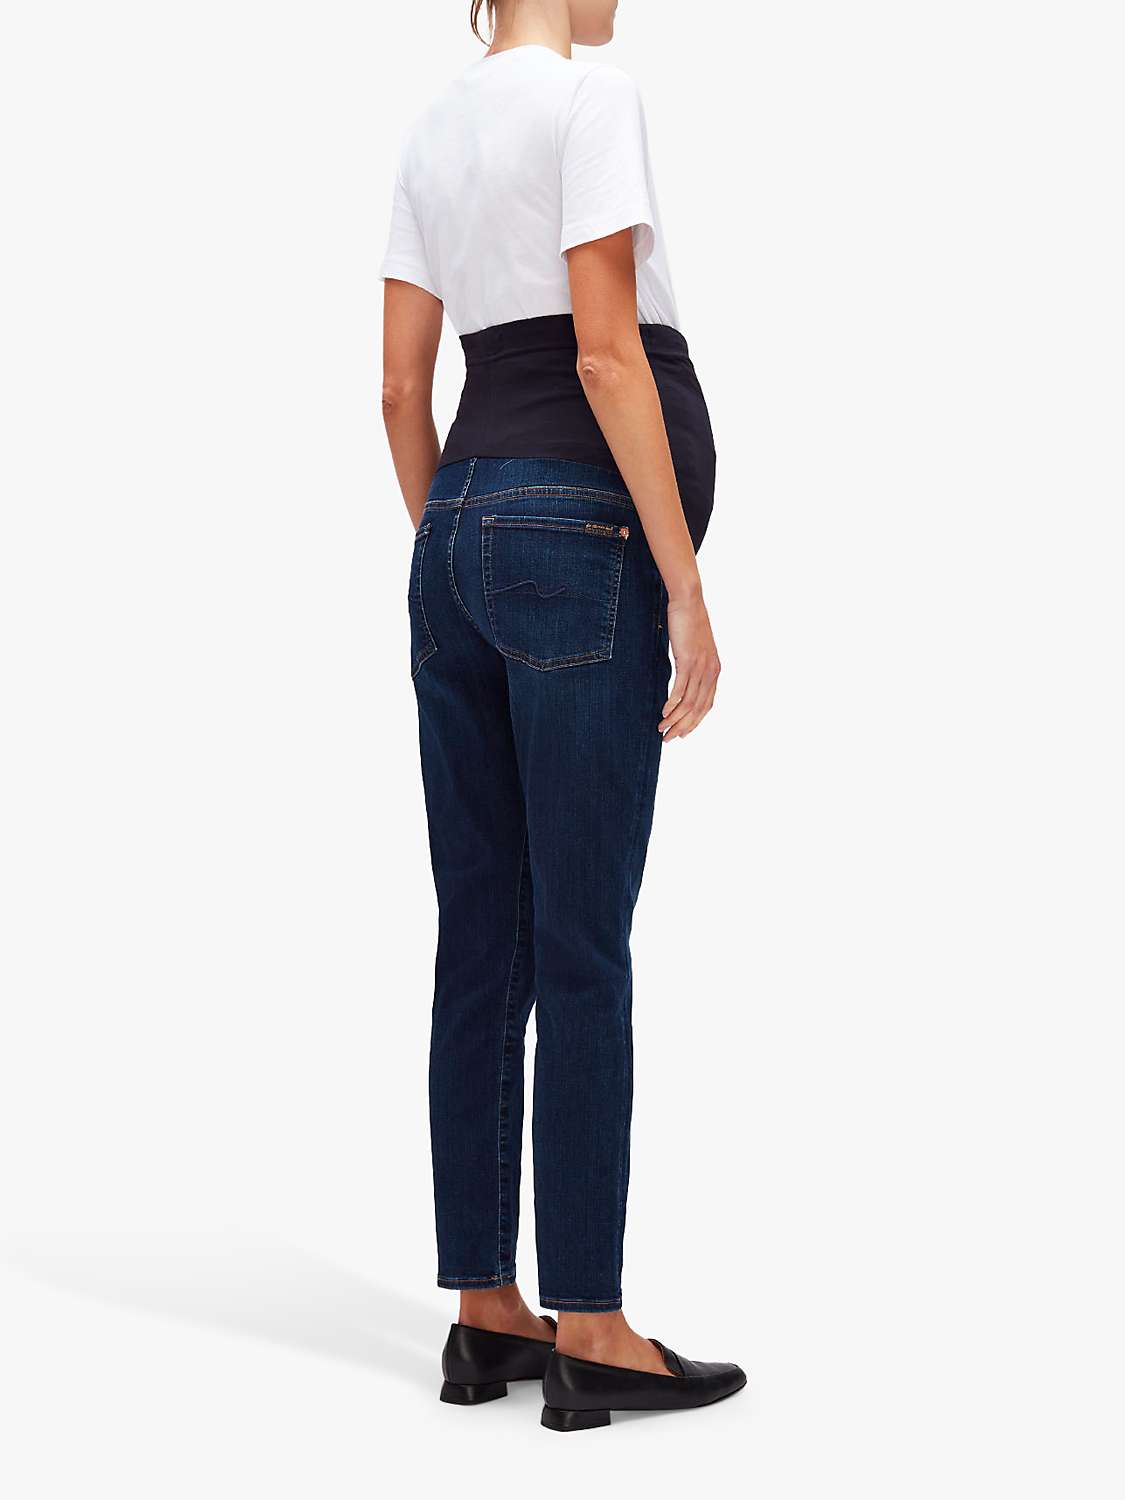 Buy 7 For All Mankind Straight Cut Maternity Jeans Online at johnlewis.com